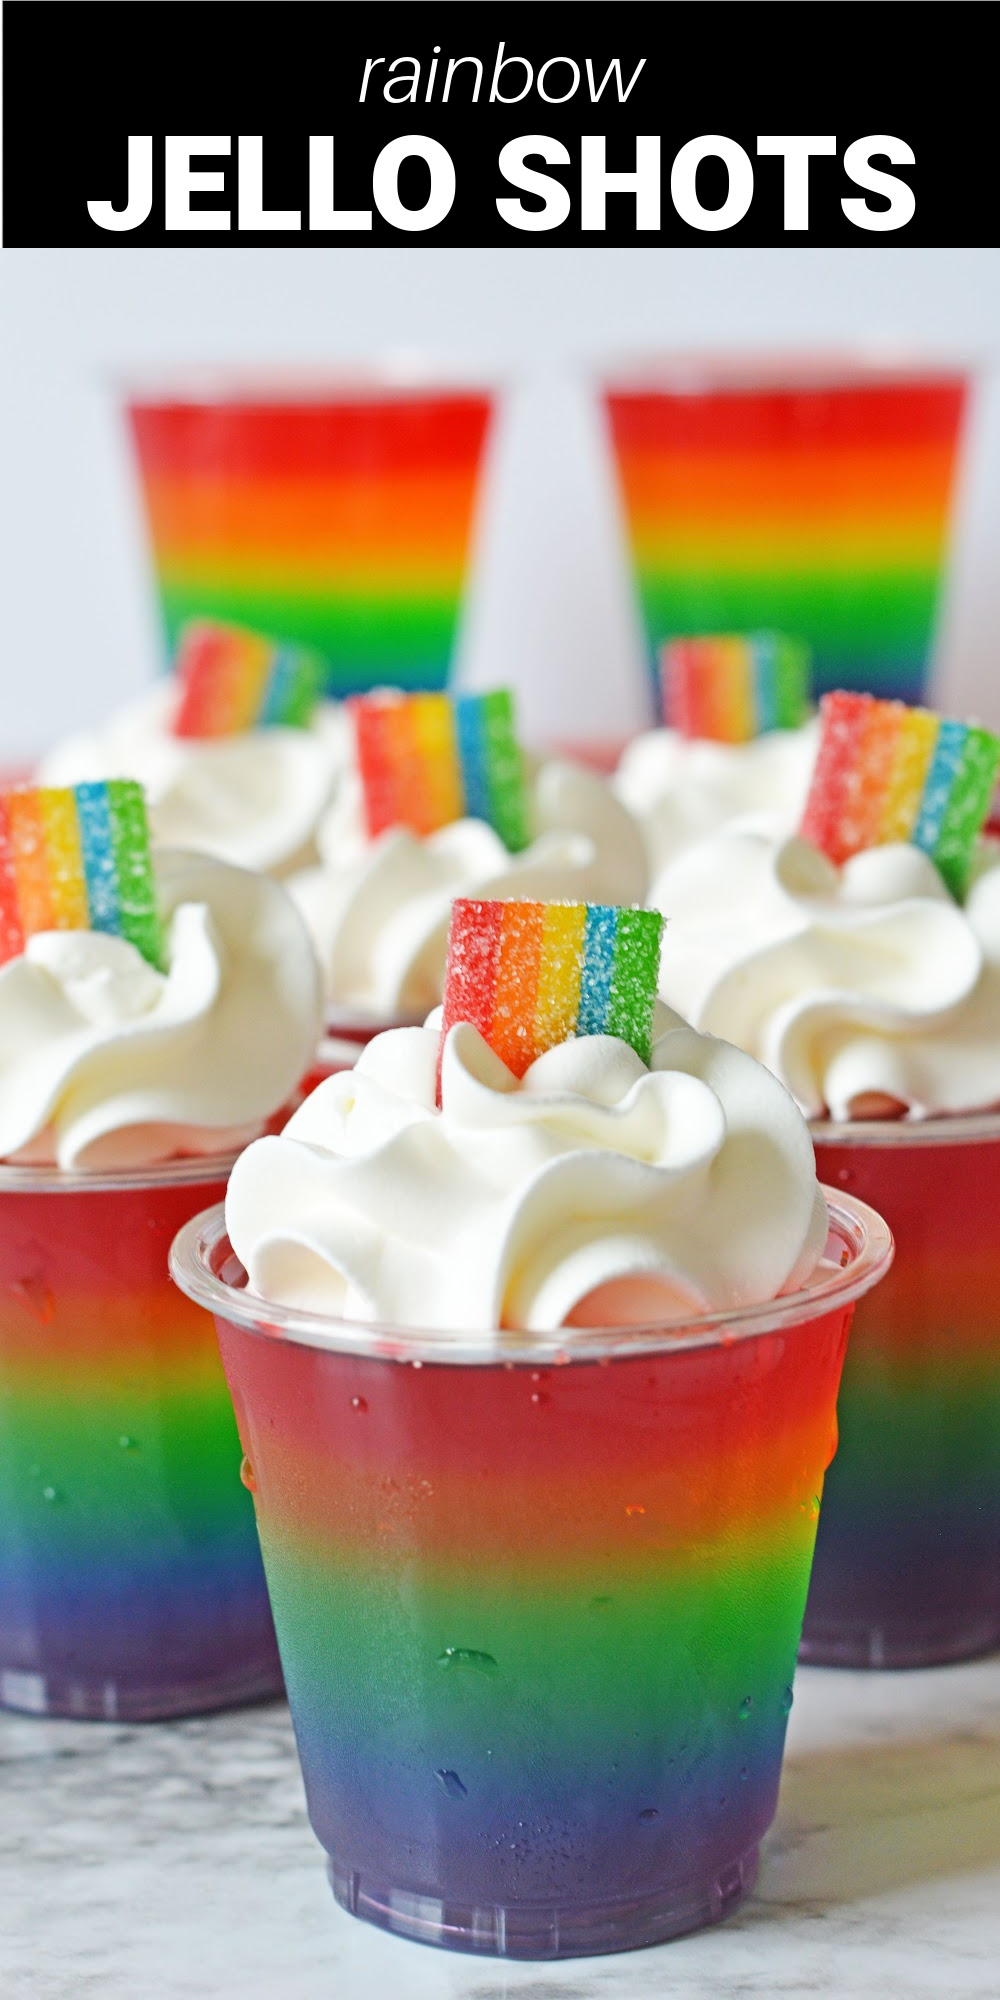 Rainbow Jello Shots are made by layering vibrantly fruity jello mixed with vodka into small cups, and topping it off with Cool Whip and Rainbow Berry Airheads to finish. They are so cute and colorful, they are the perfect adult-only treats for any summer gathering or barbecue.